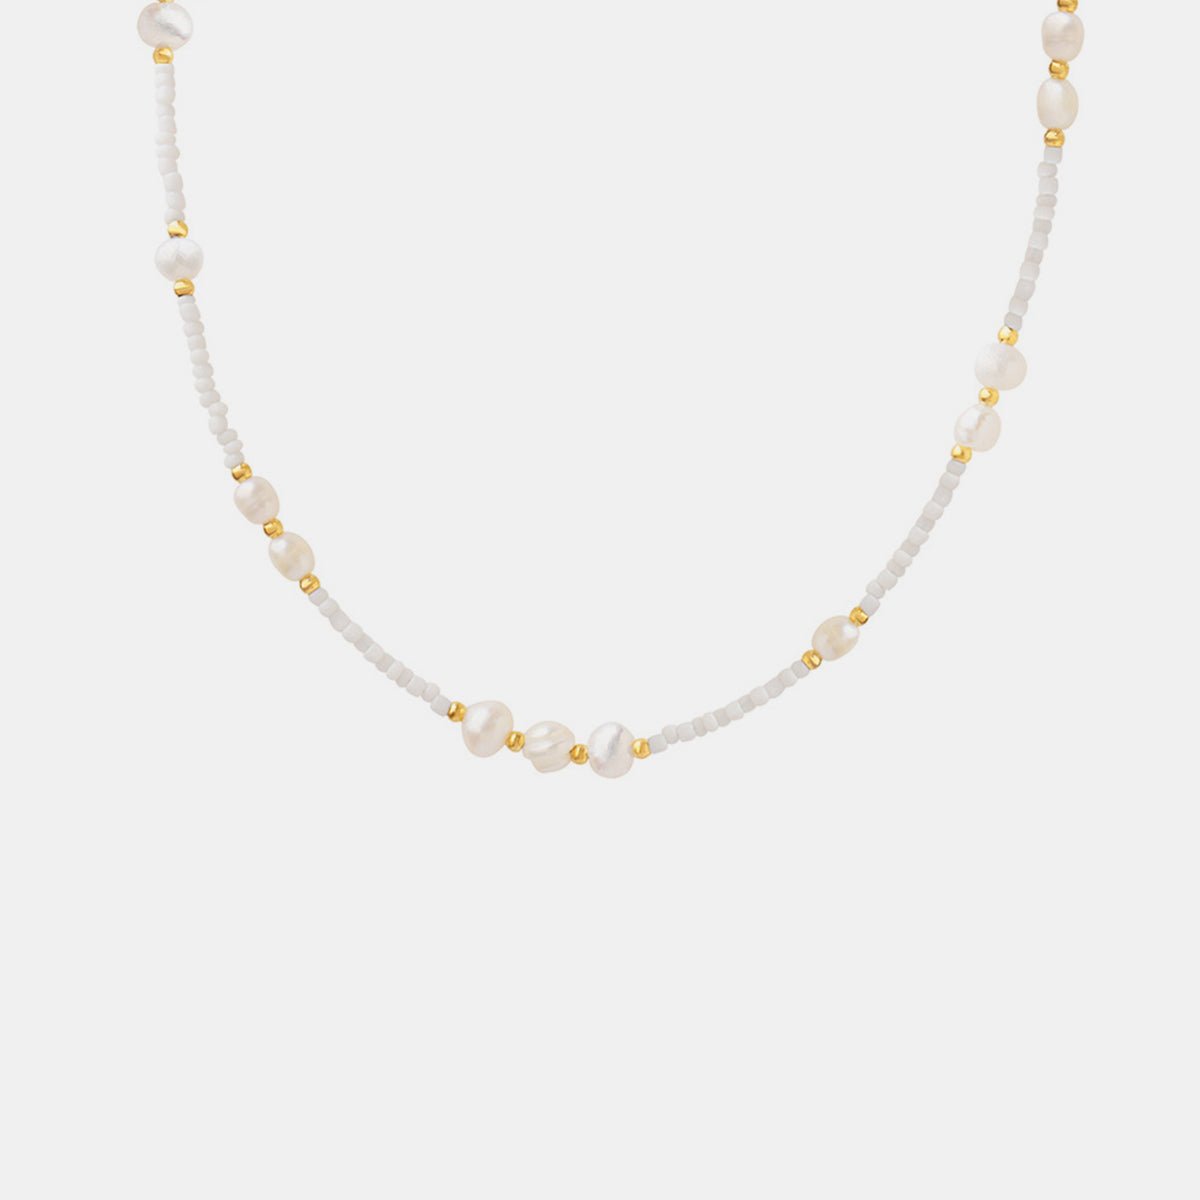 Glass Bead & Freshwater Pearl NecklaceNecklaceBeach Rose Co.